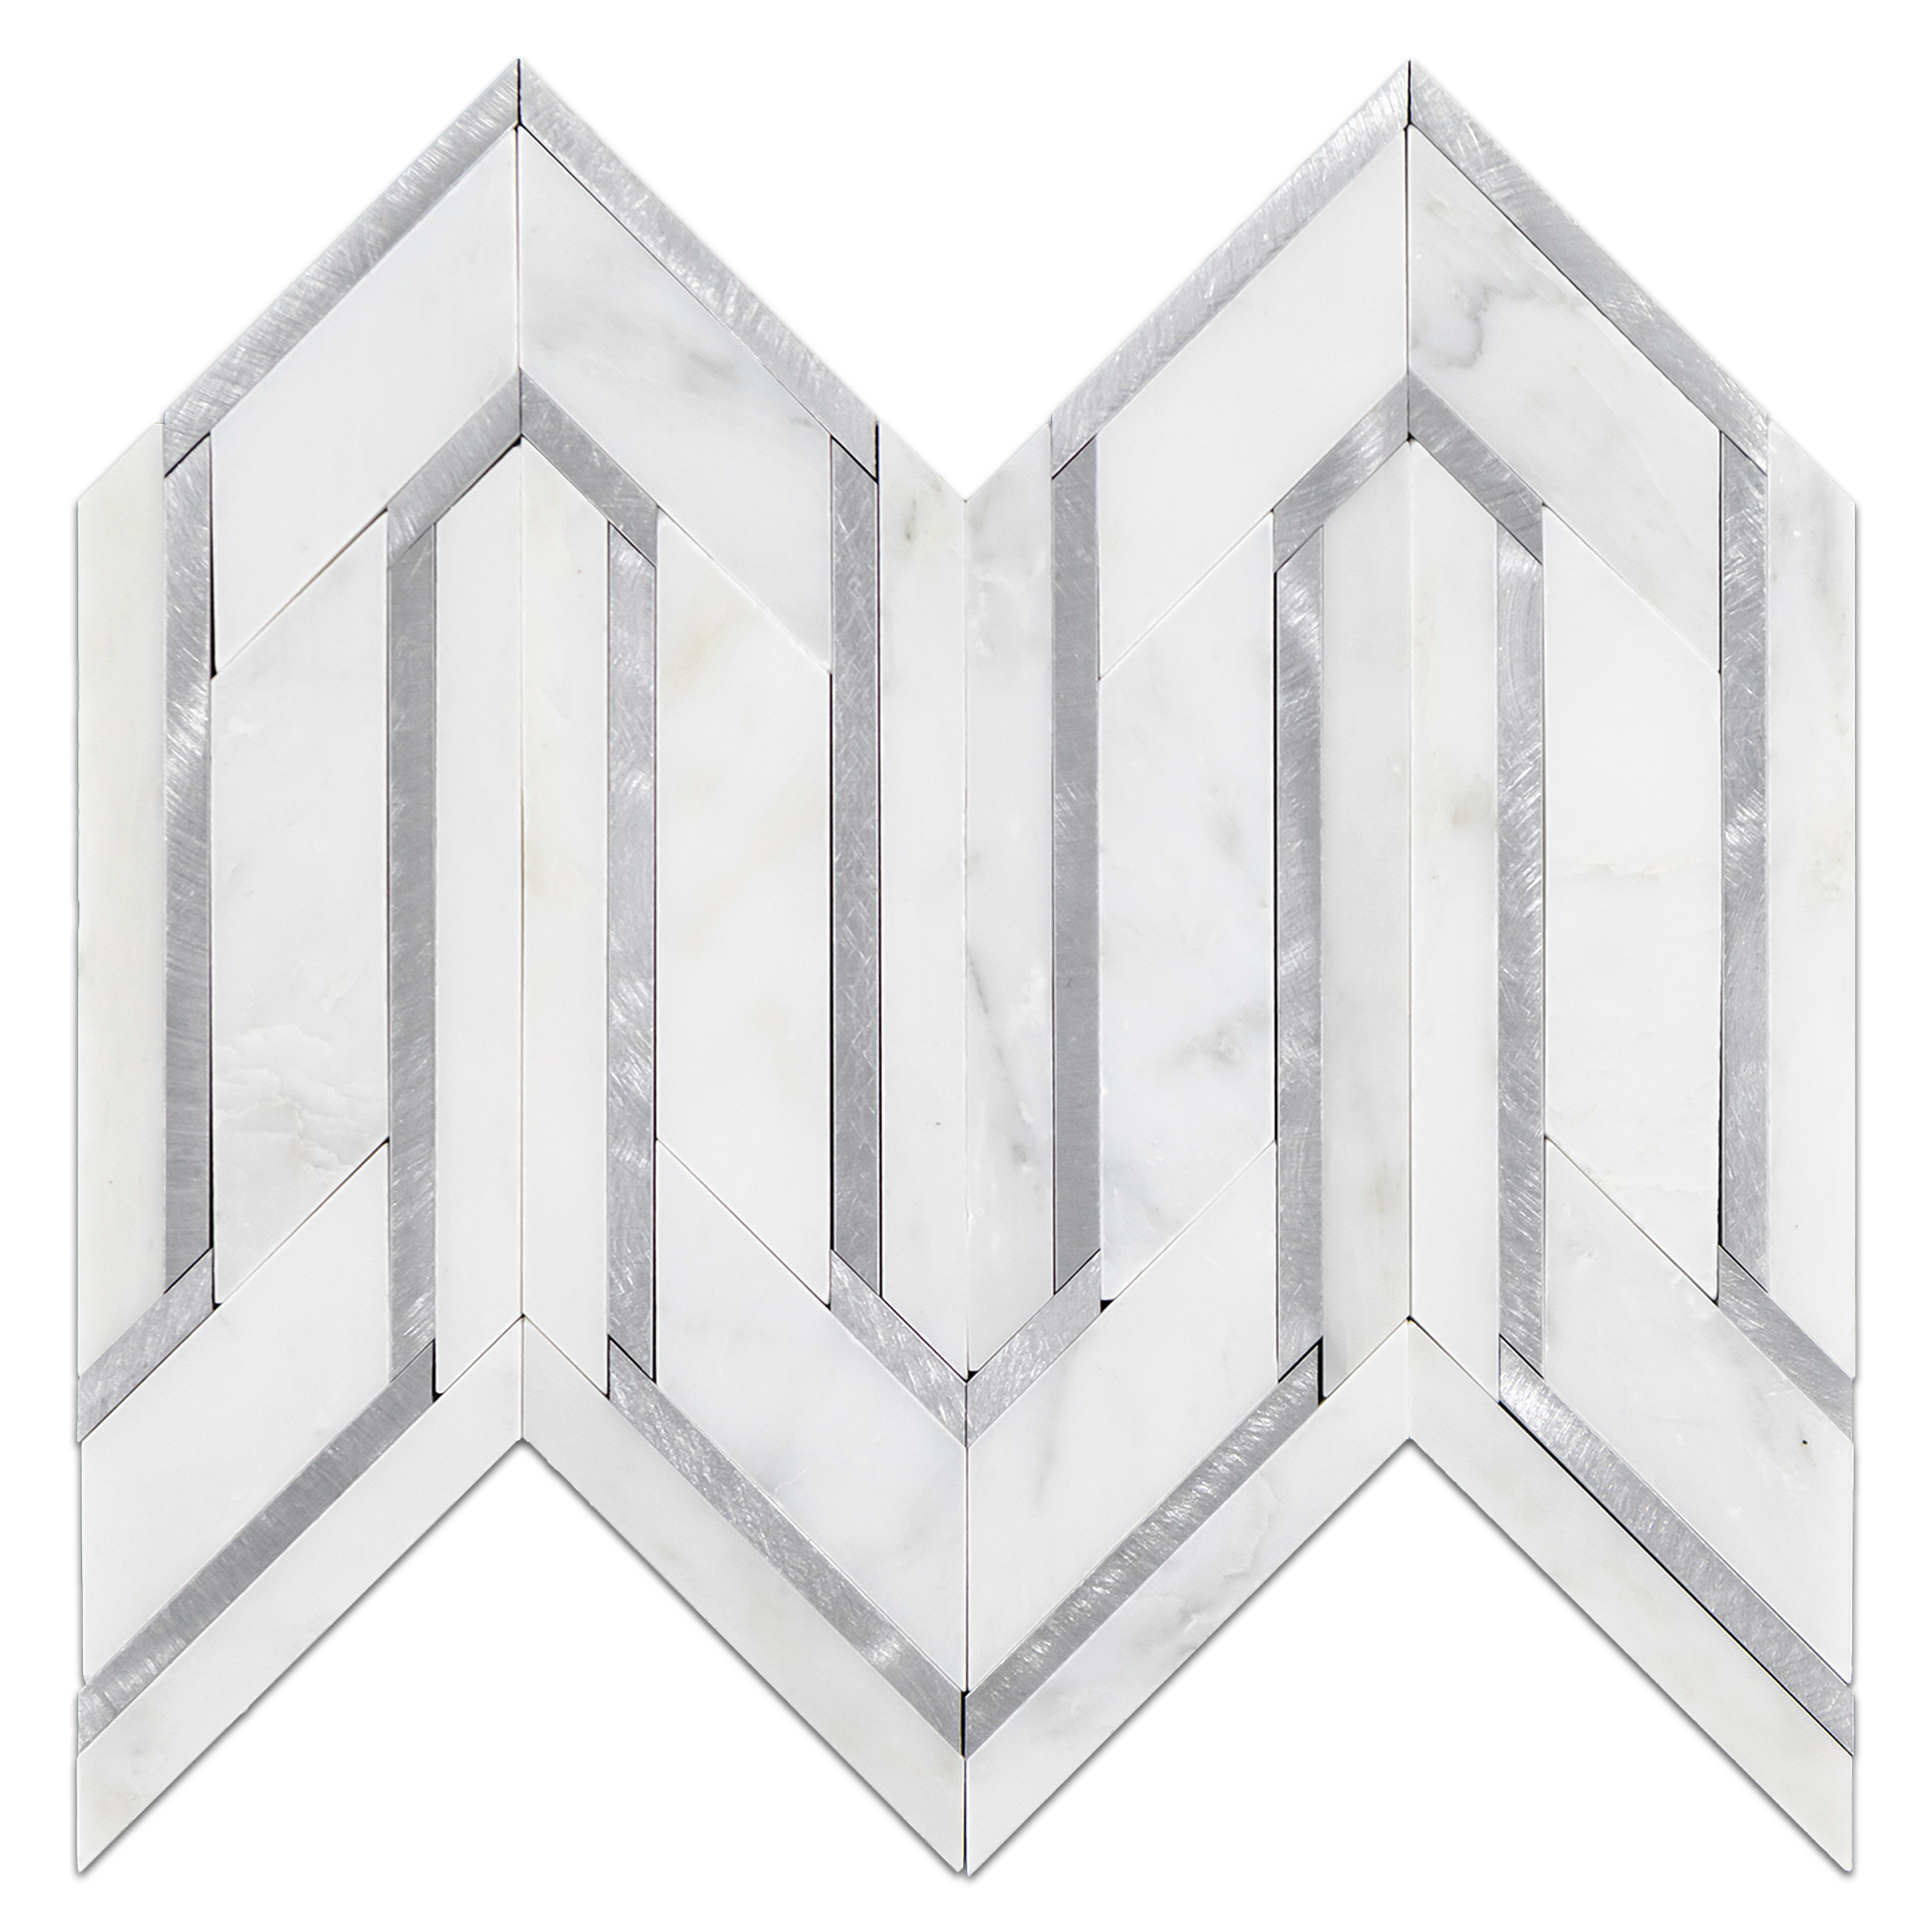 Elon Pearl White Silver Aluminum Marble Serpentine Field Mosaic Tile 9.3125x12x0.375 Polished - Surface Group Online Tile Store